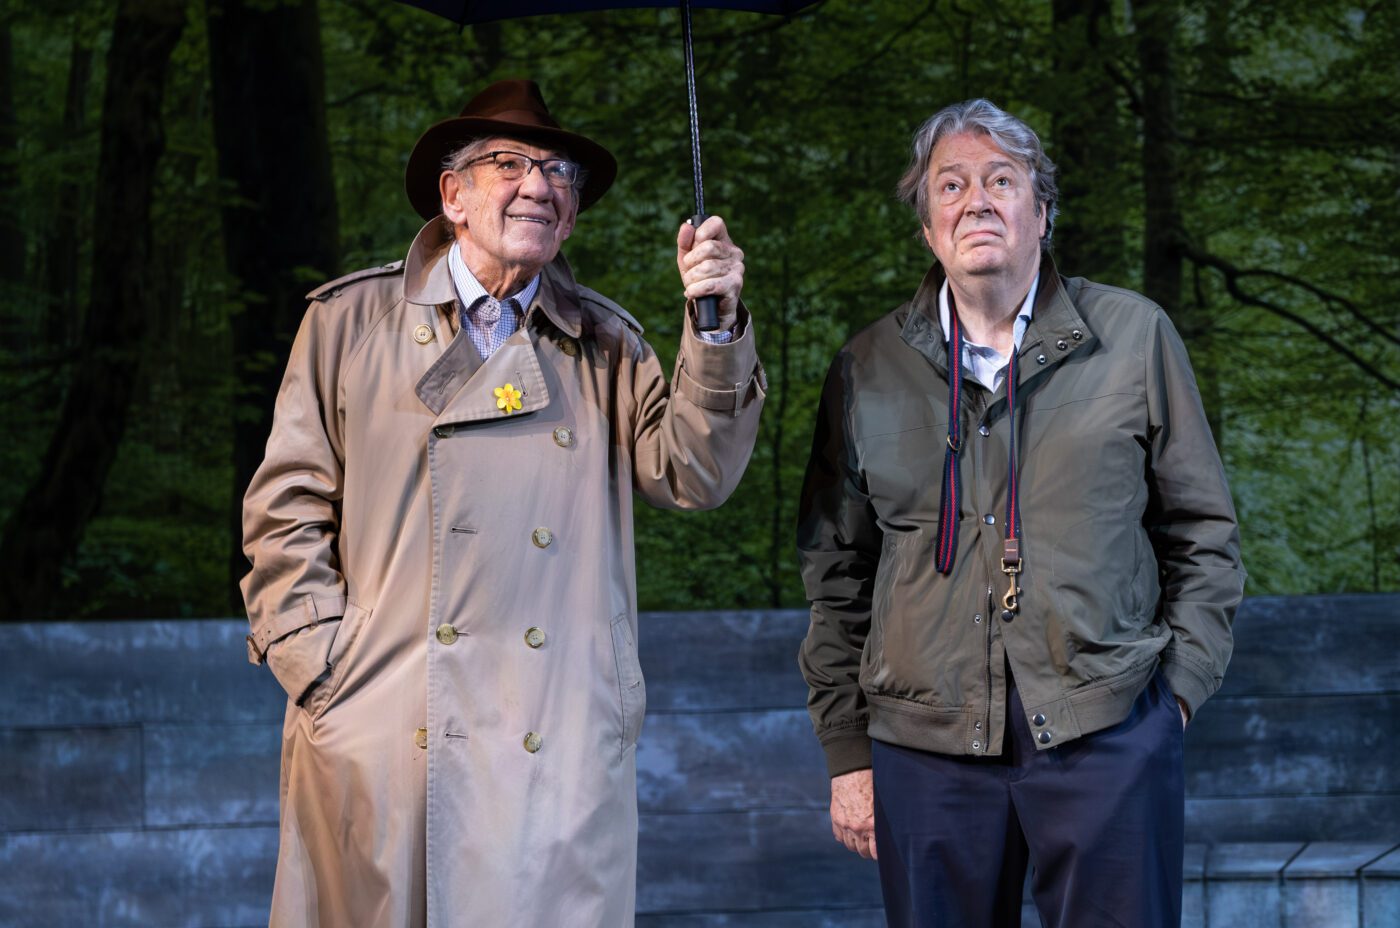 Ian Mckellen and Roger Allam on stage, sheltering from the rain under a shared umbrella.